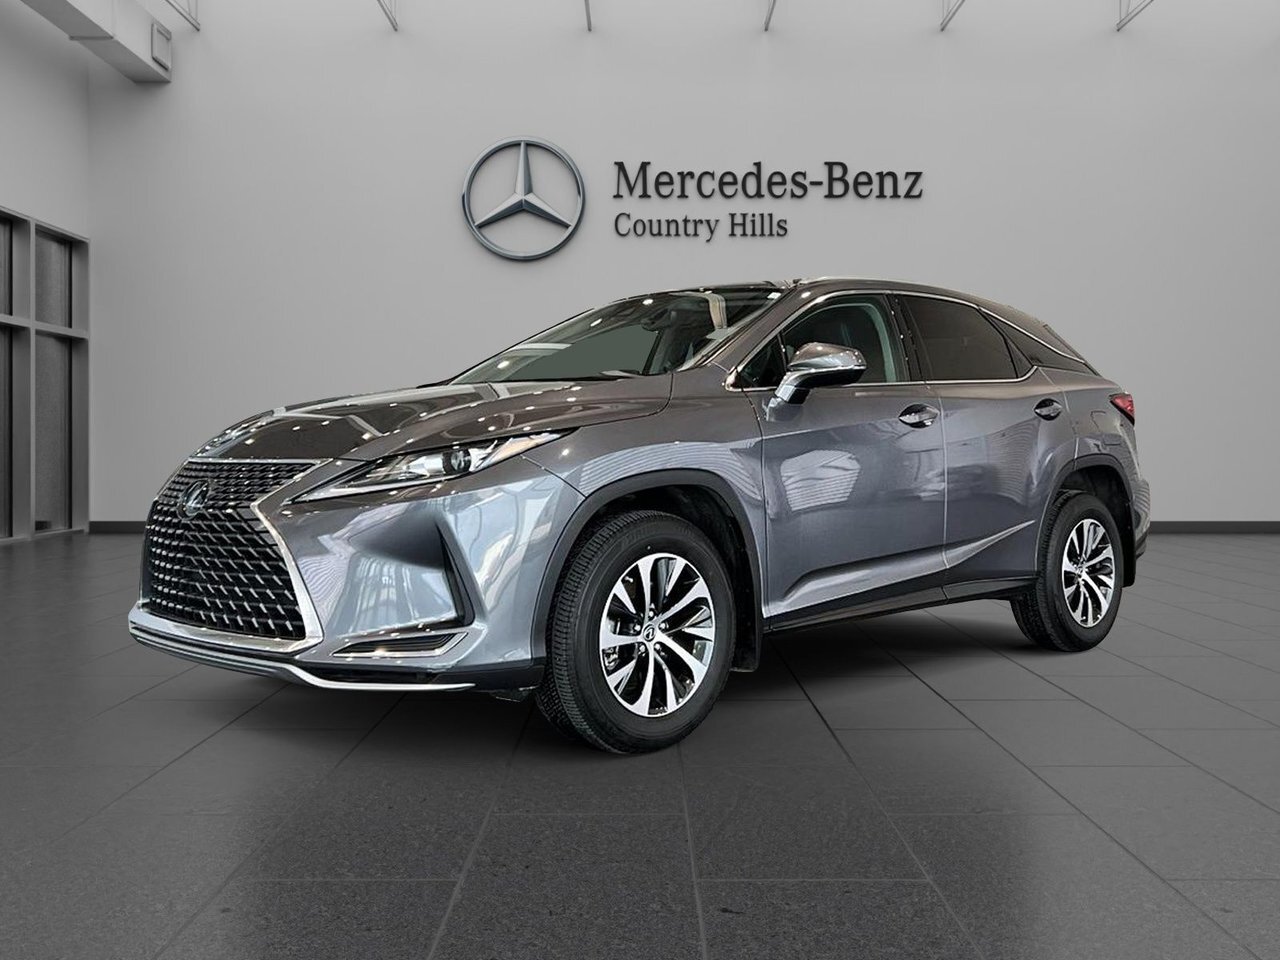 2020 Lexus RX 350 8A One owner, No accidents! Low km's!